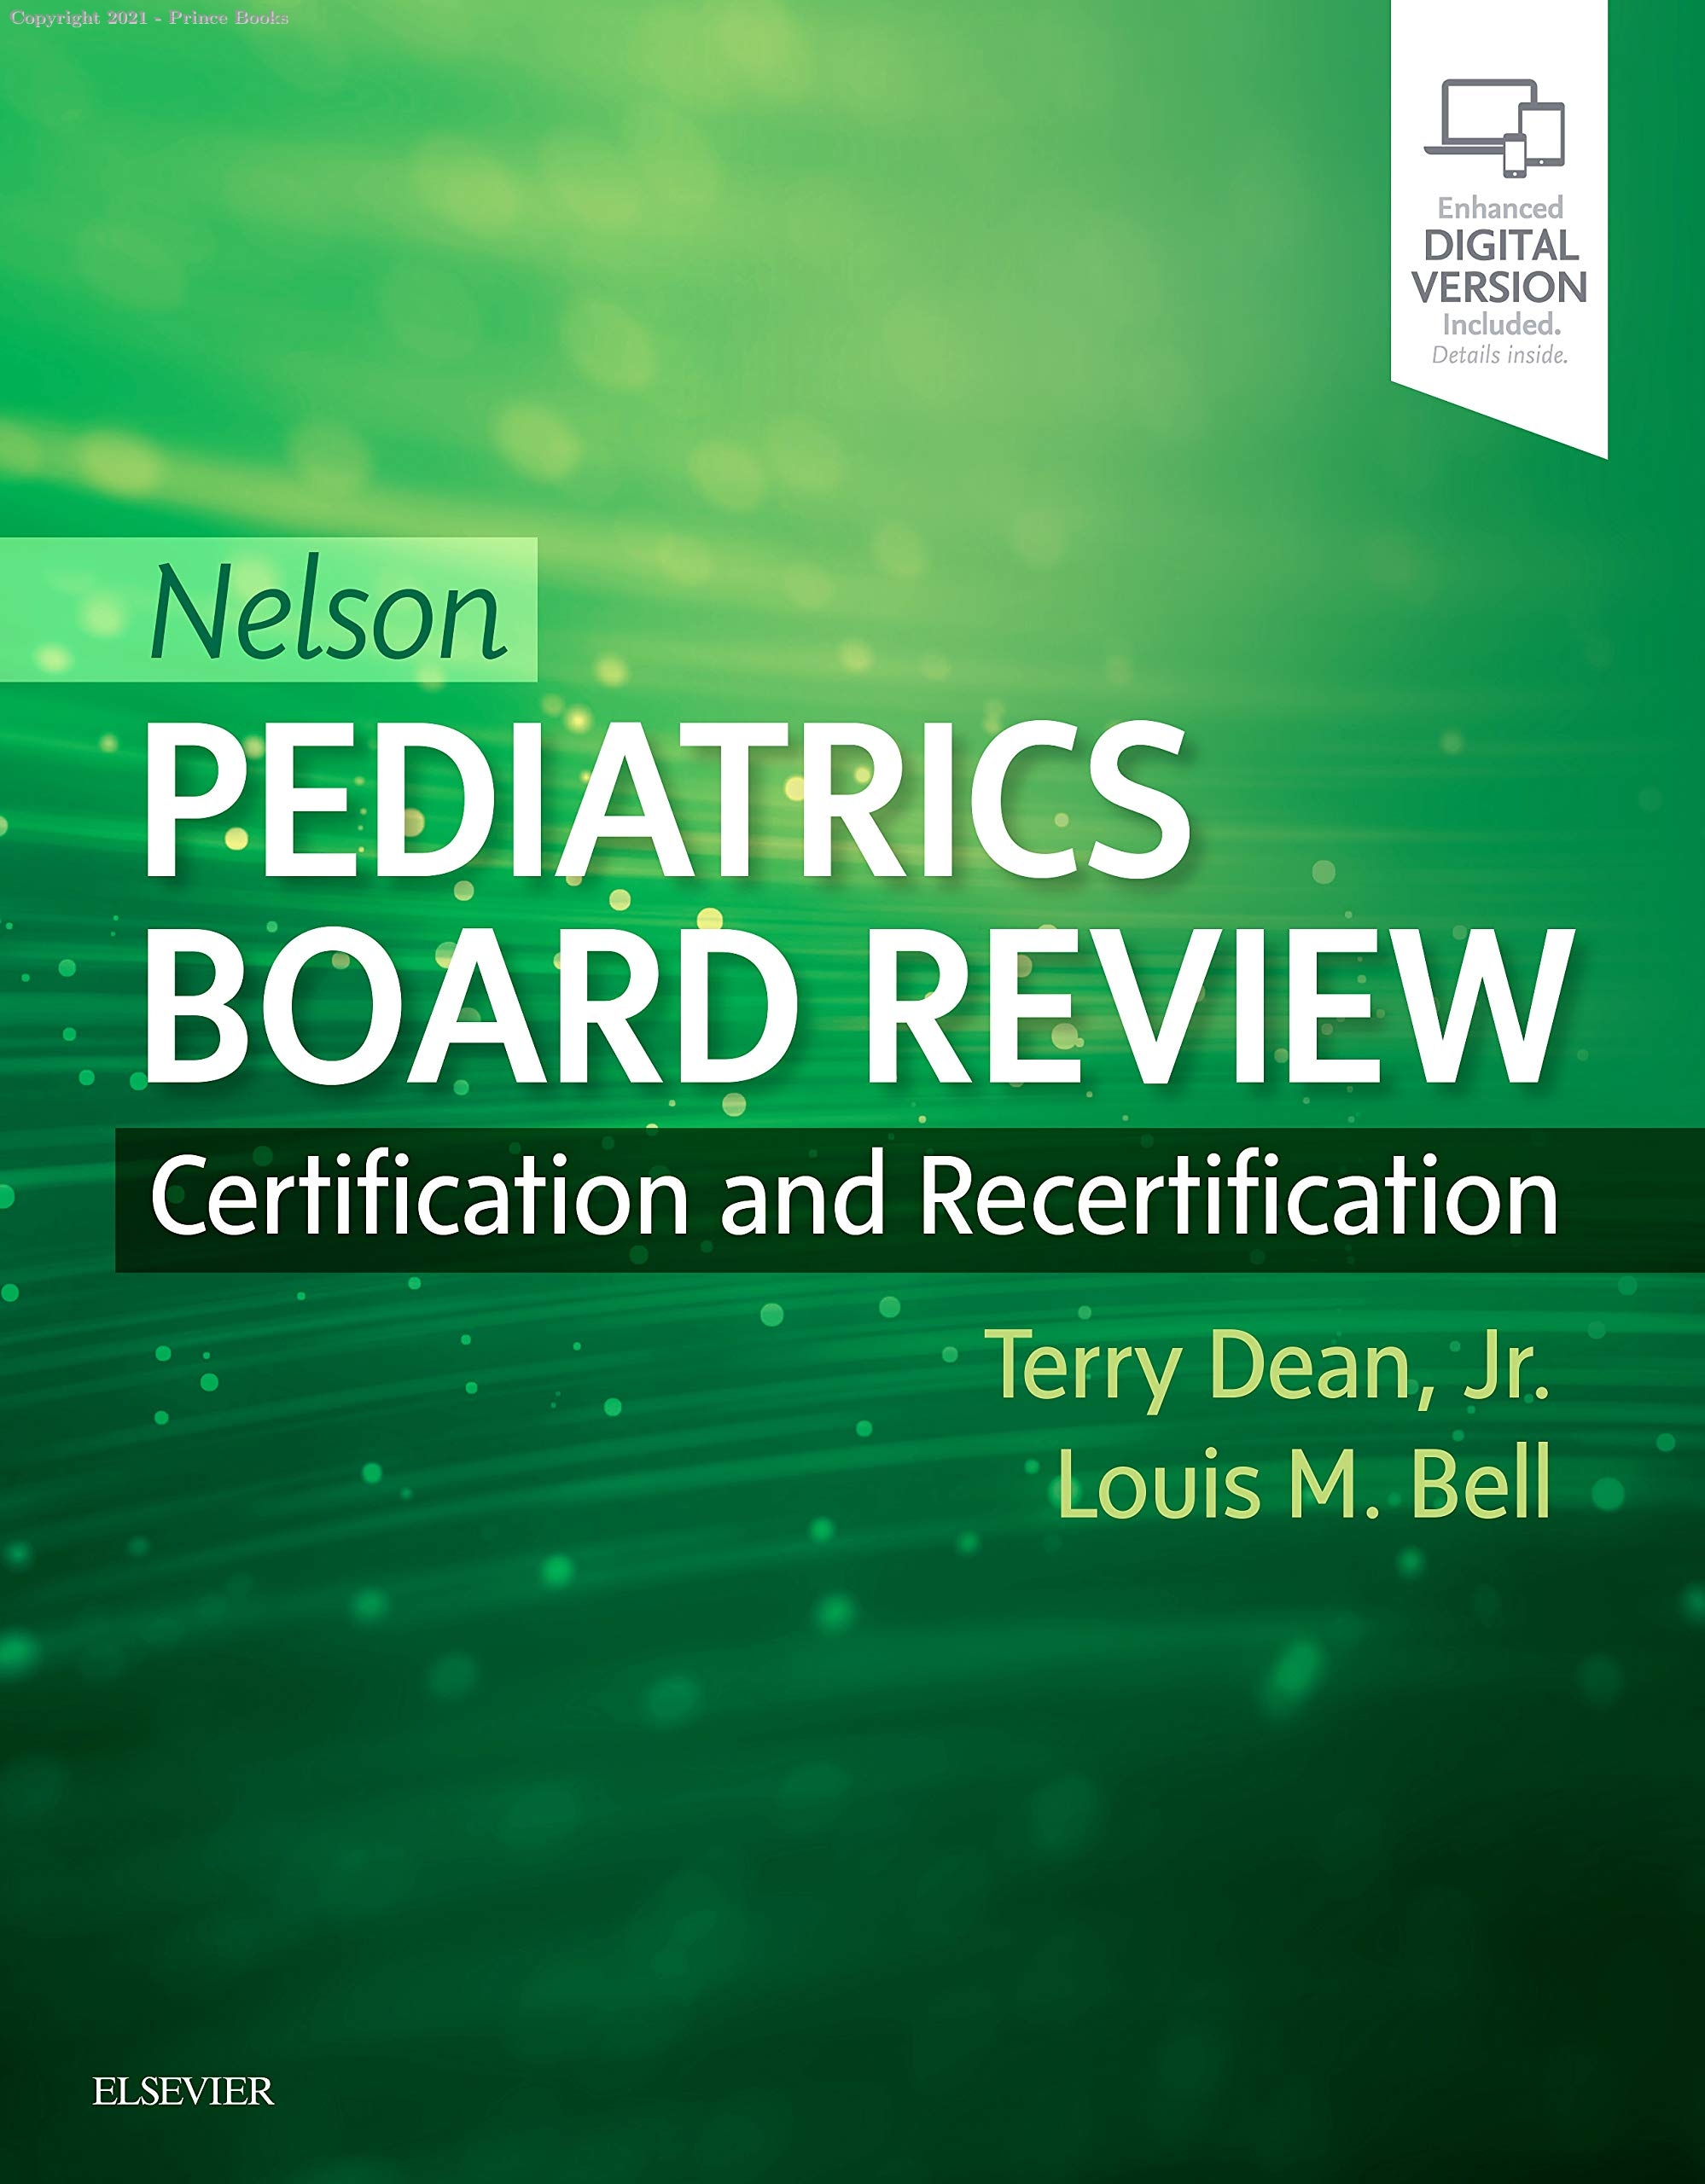 nelson pediatrics board review certification and recertification